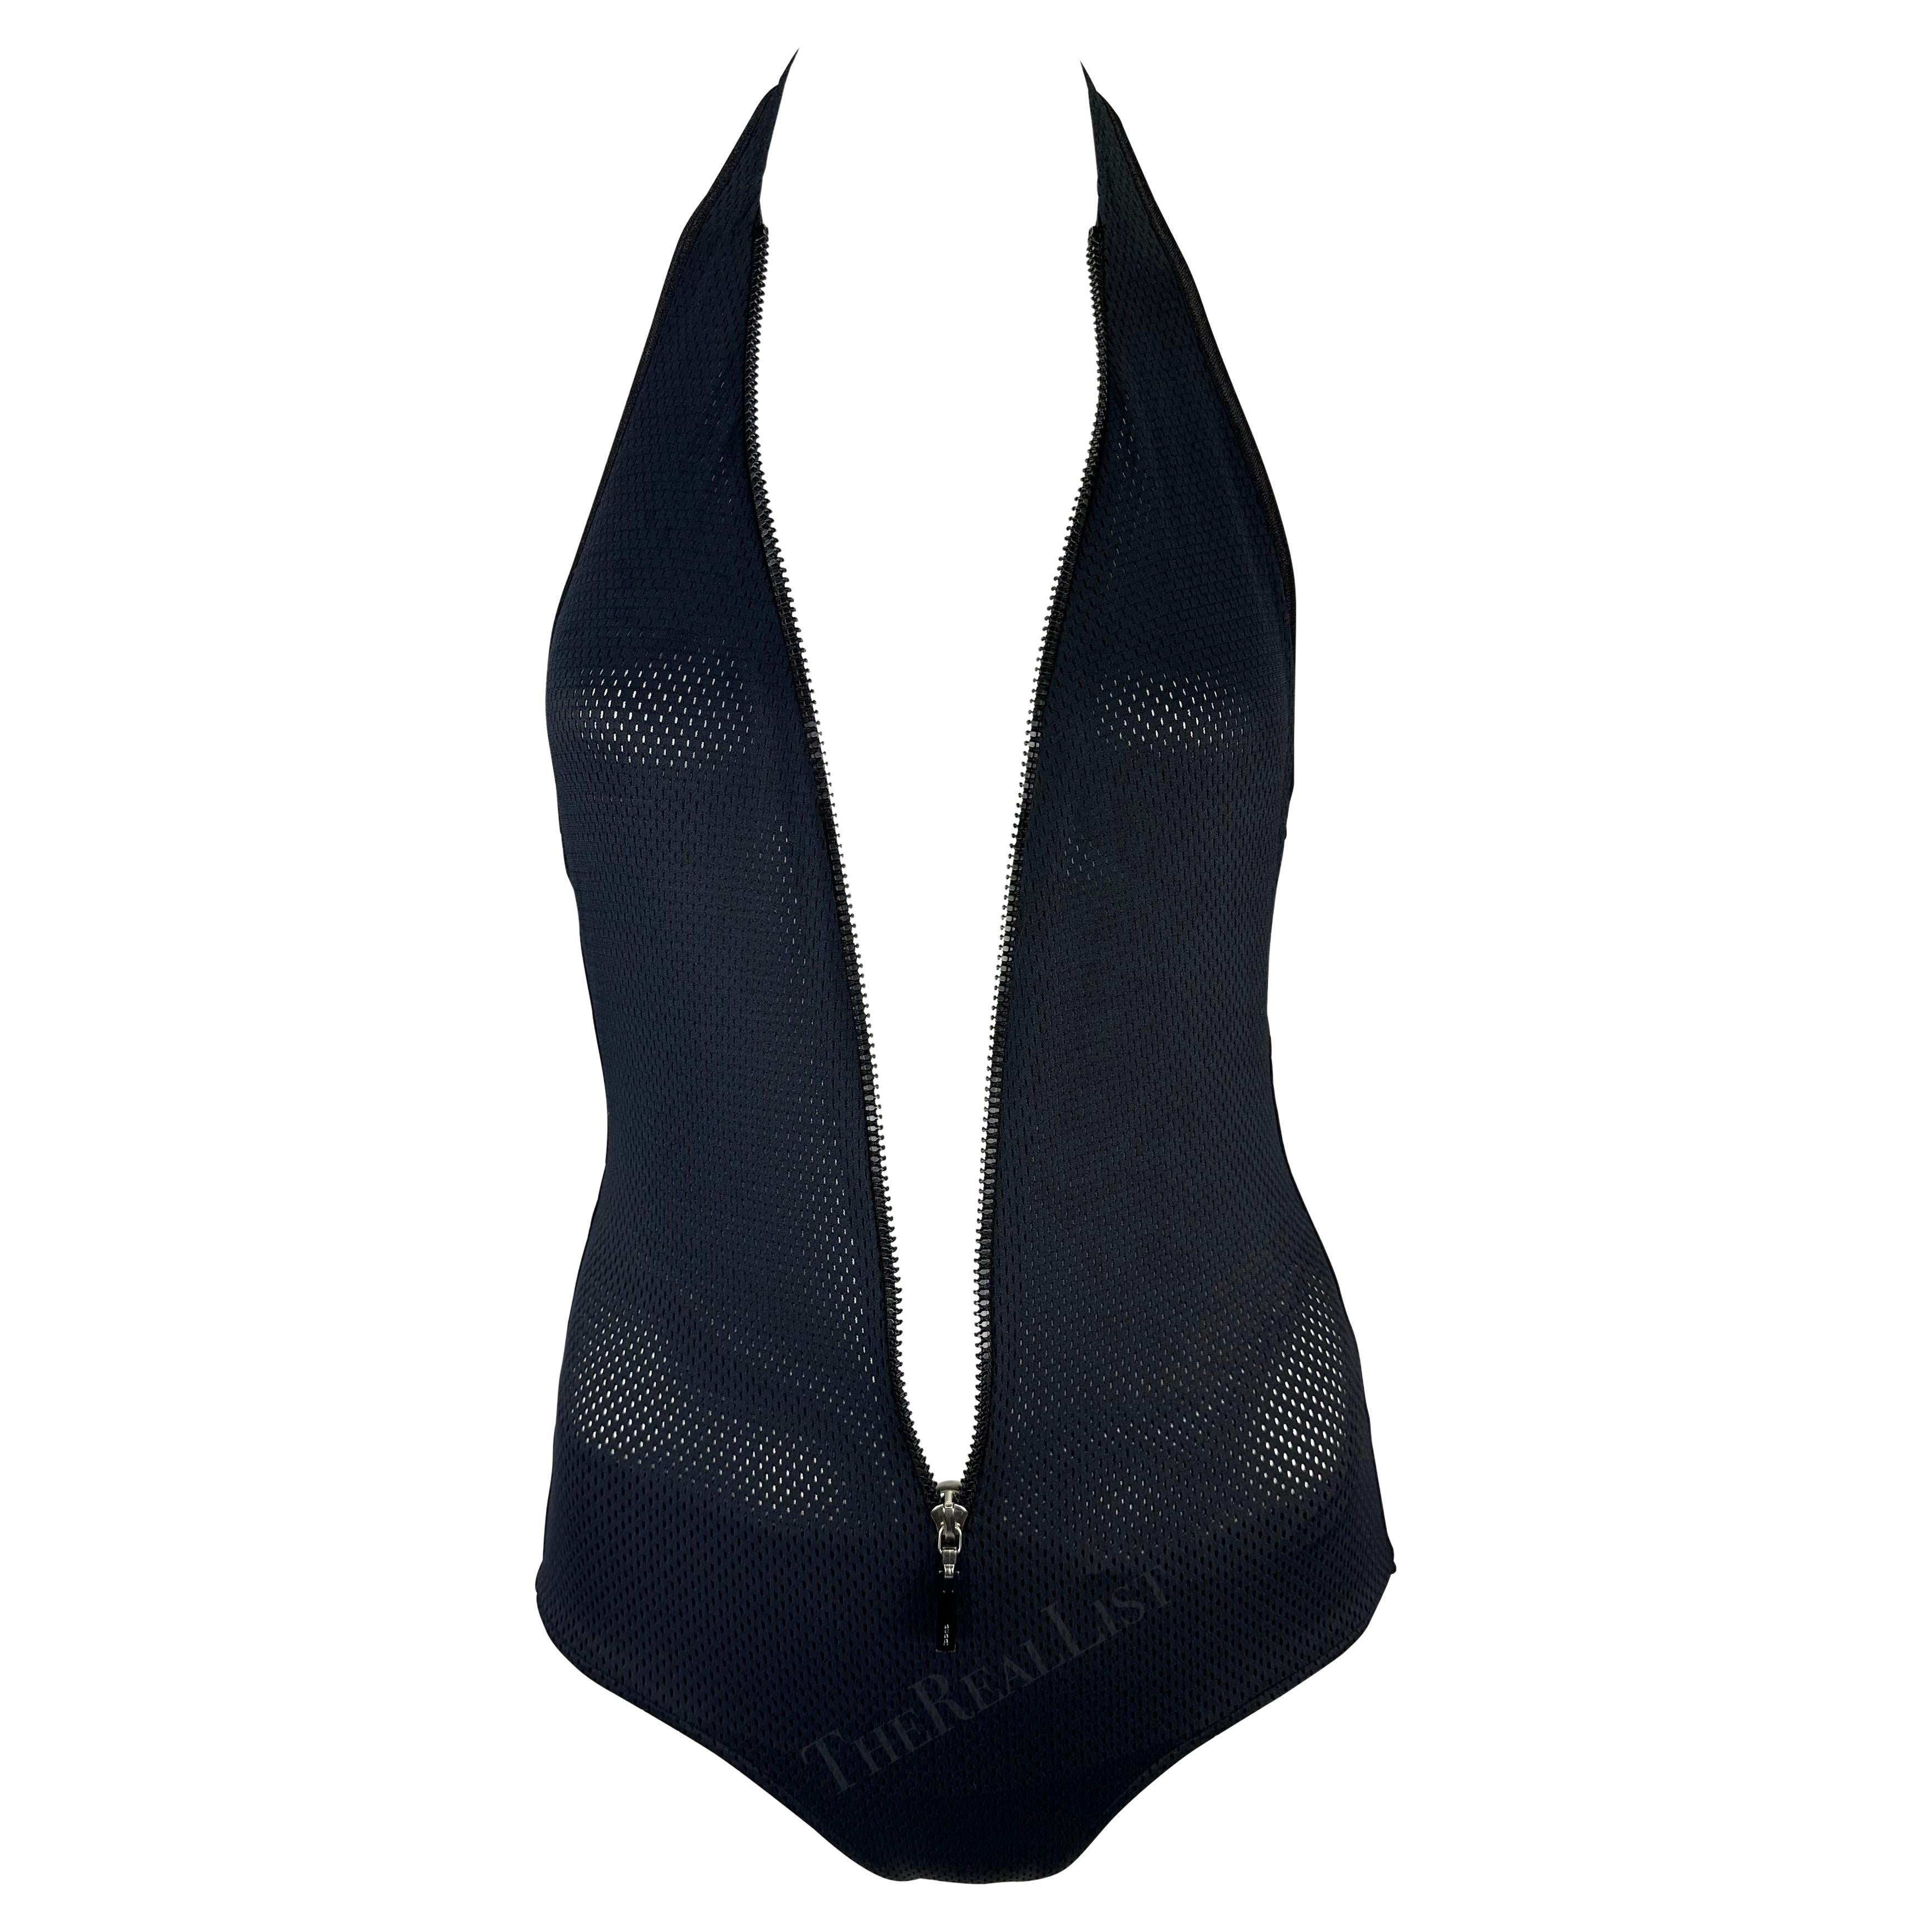 S/S 2002 Gucci by Tom Ford Sheer Mesh Zip-Up Plunging Halter One-Piece Swimsuit For Sale